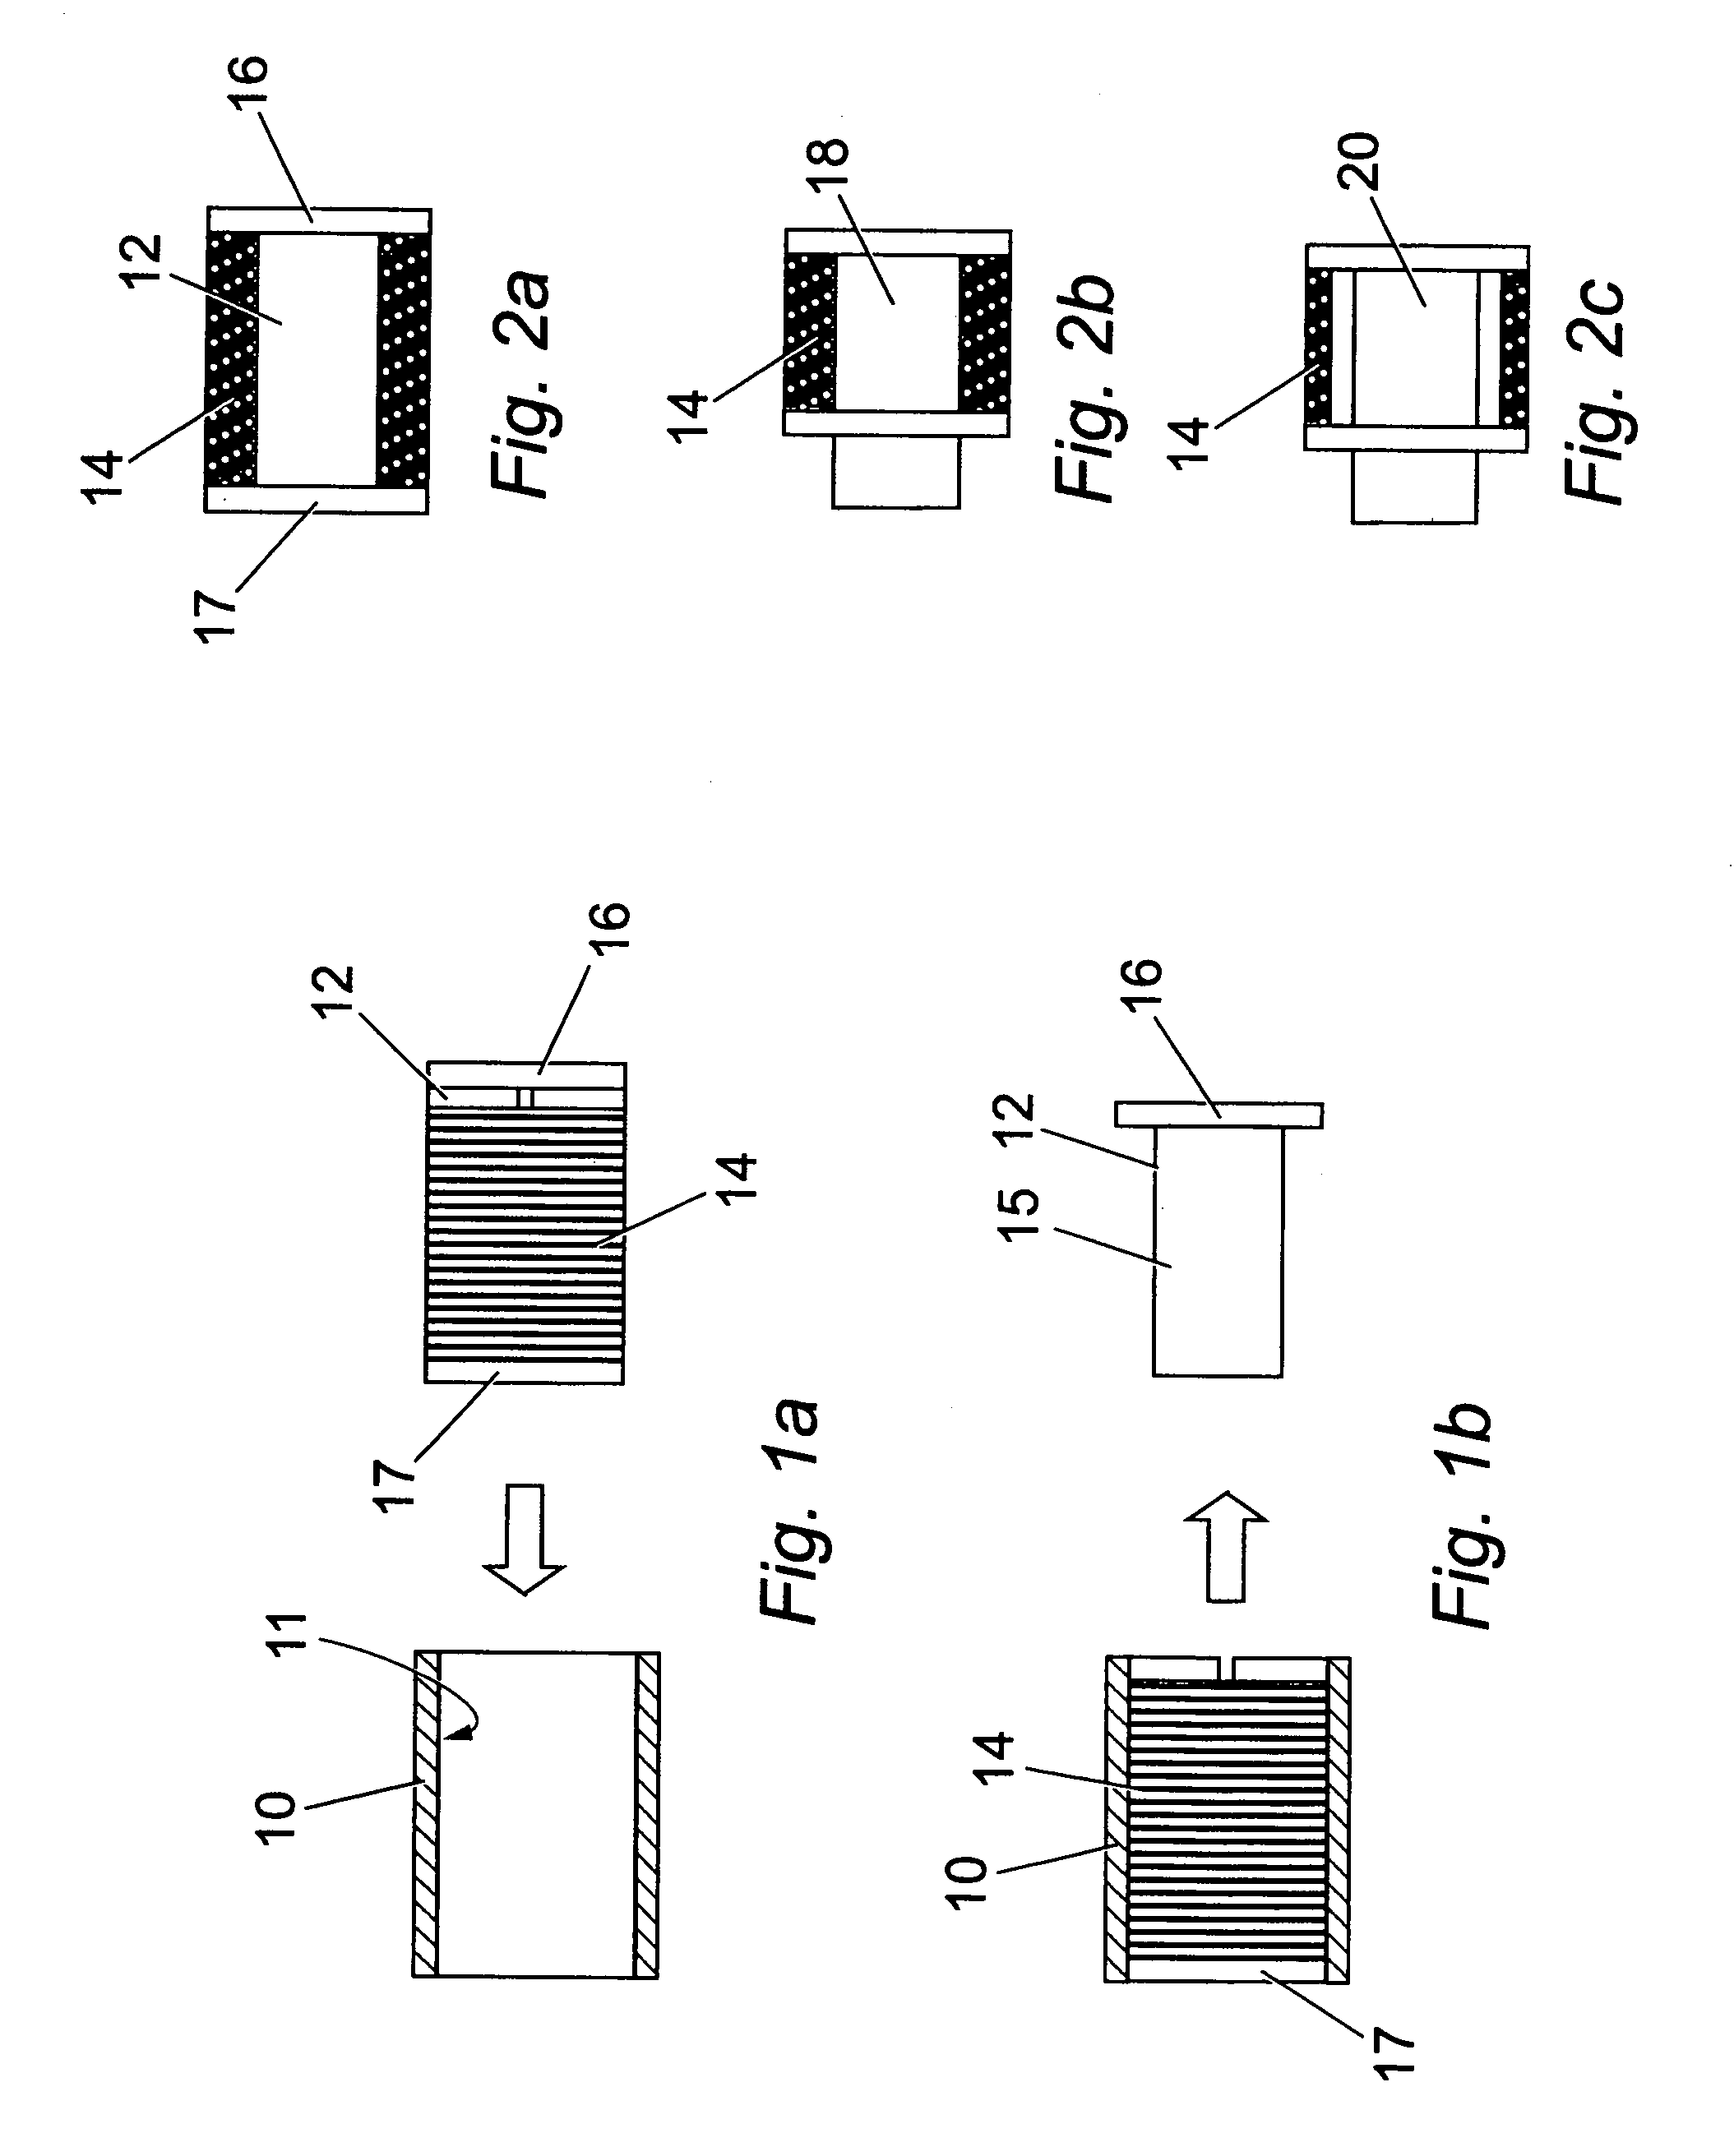 Method and apparatus for deploying a tubular